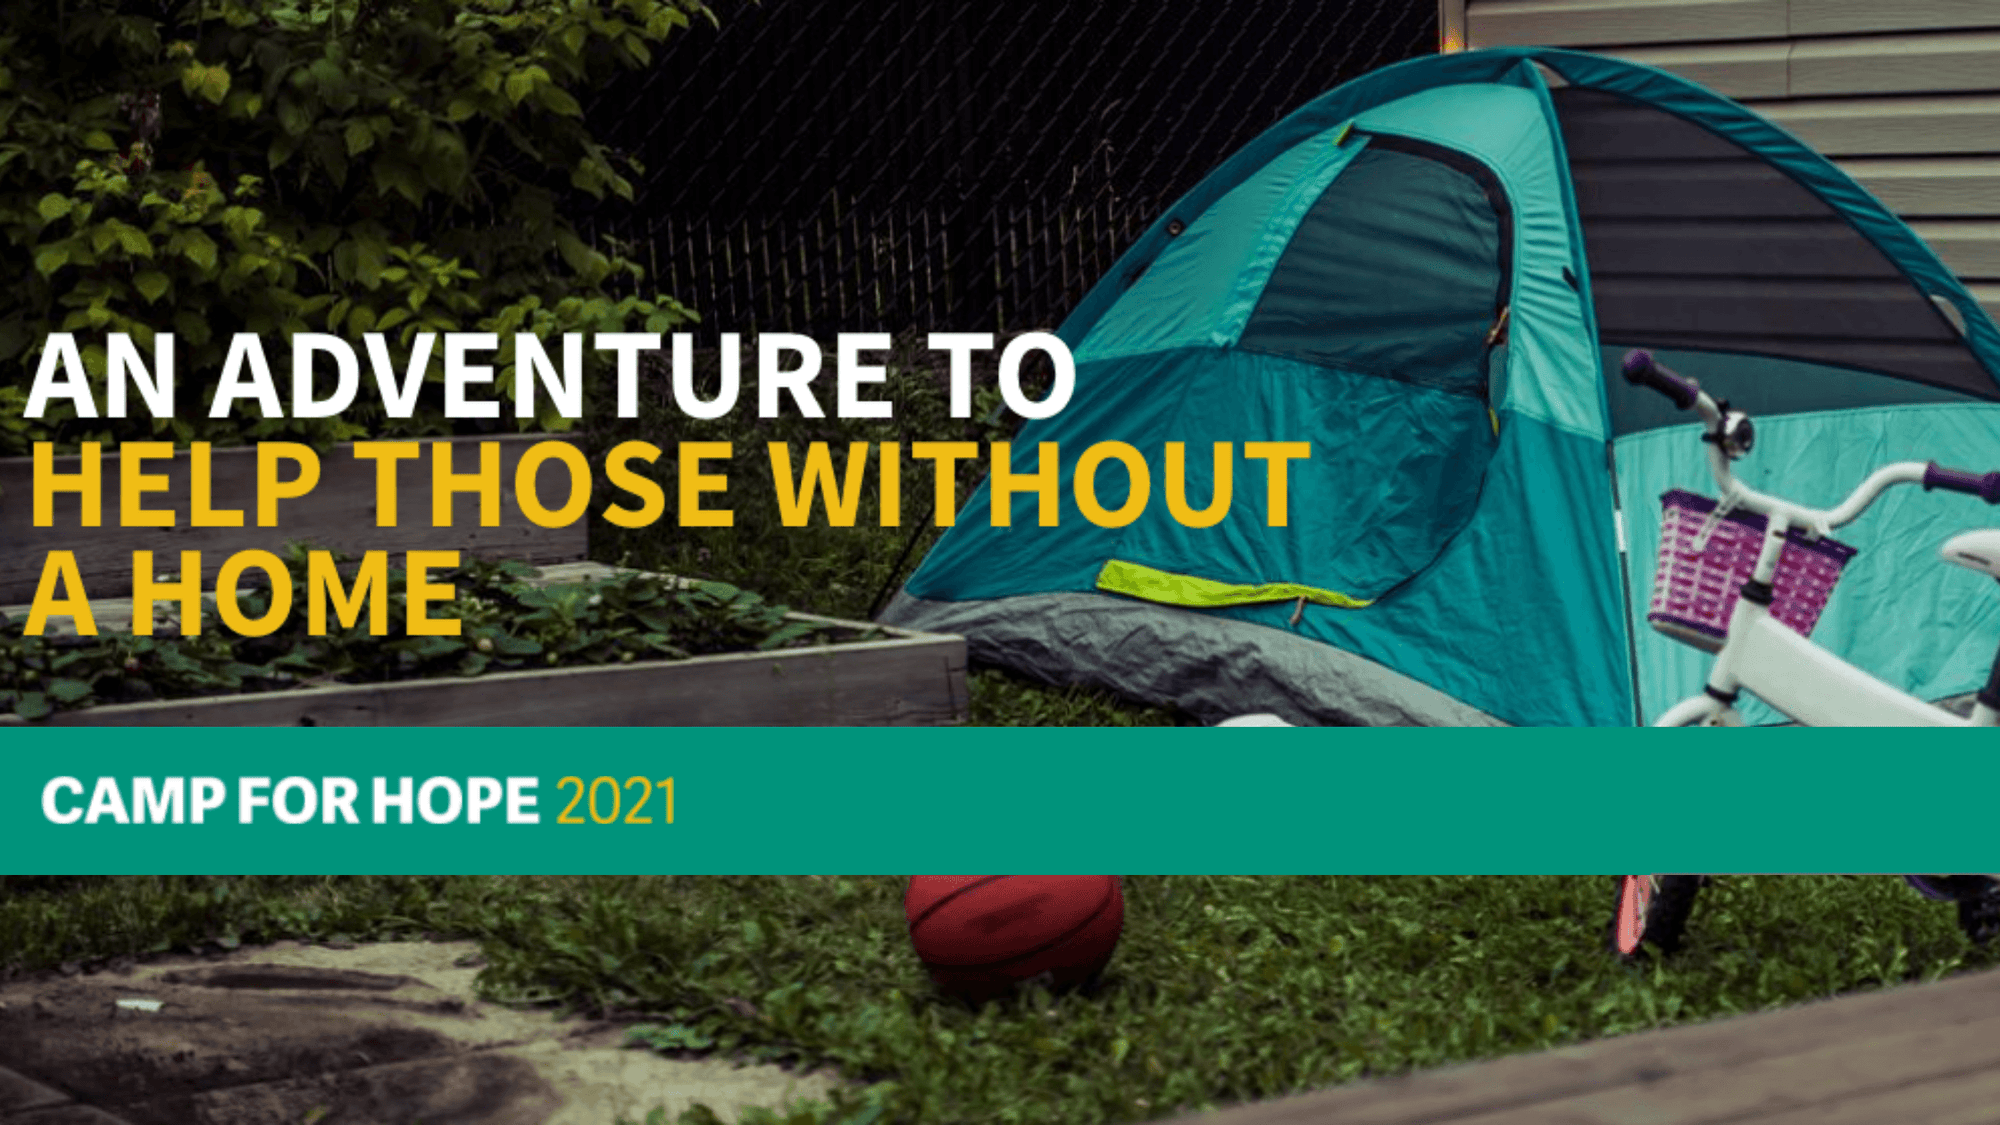 Wild | Life x Mustard Seed Camp For Hope Fundraiser - Wild | Life Outdoor Adventures